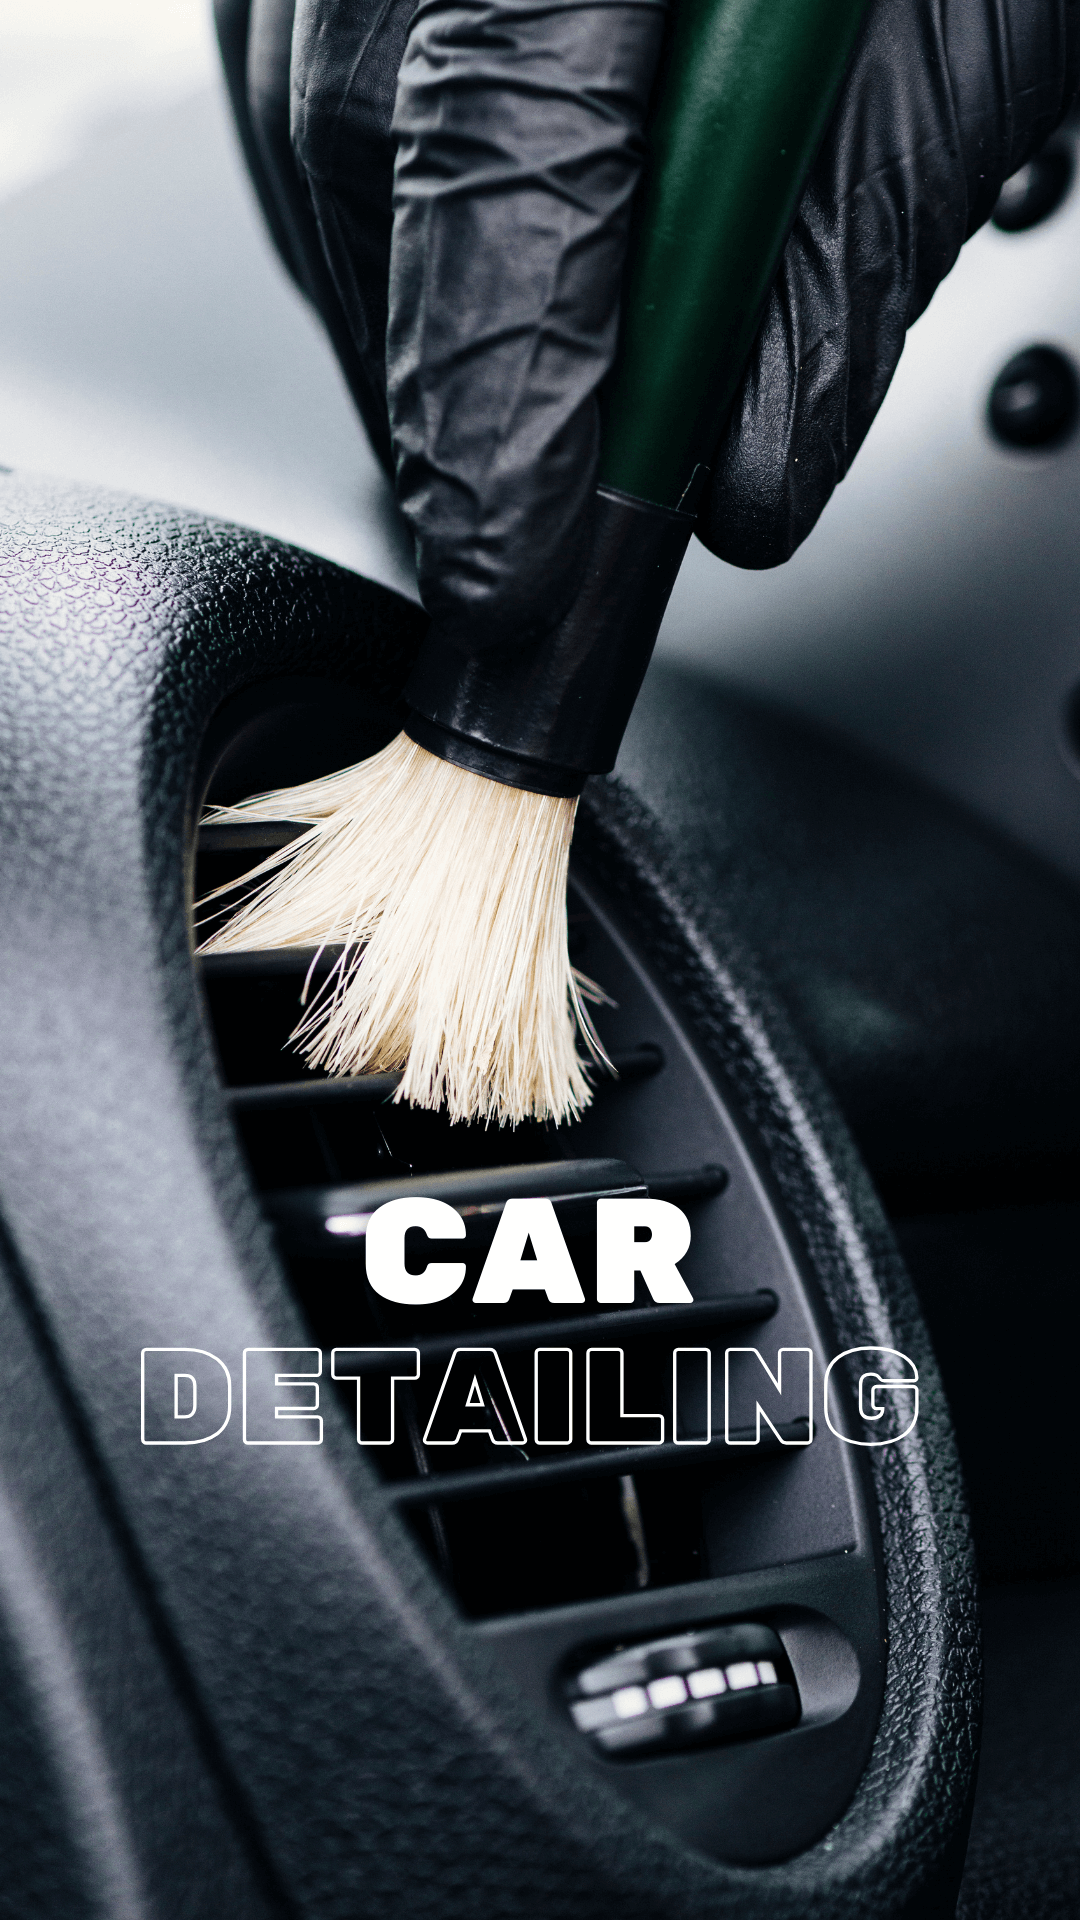 Precision detailing for a flawless finish.